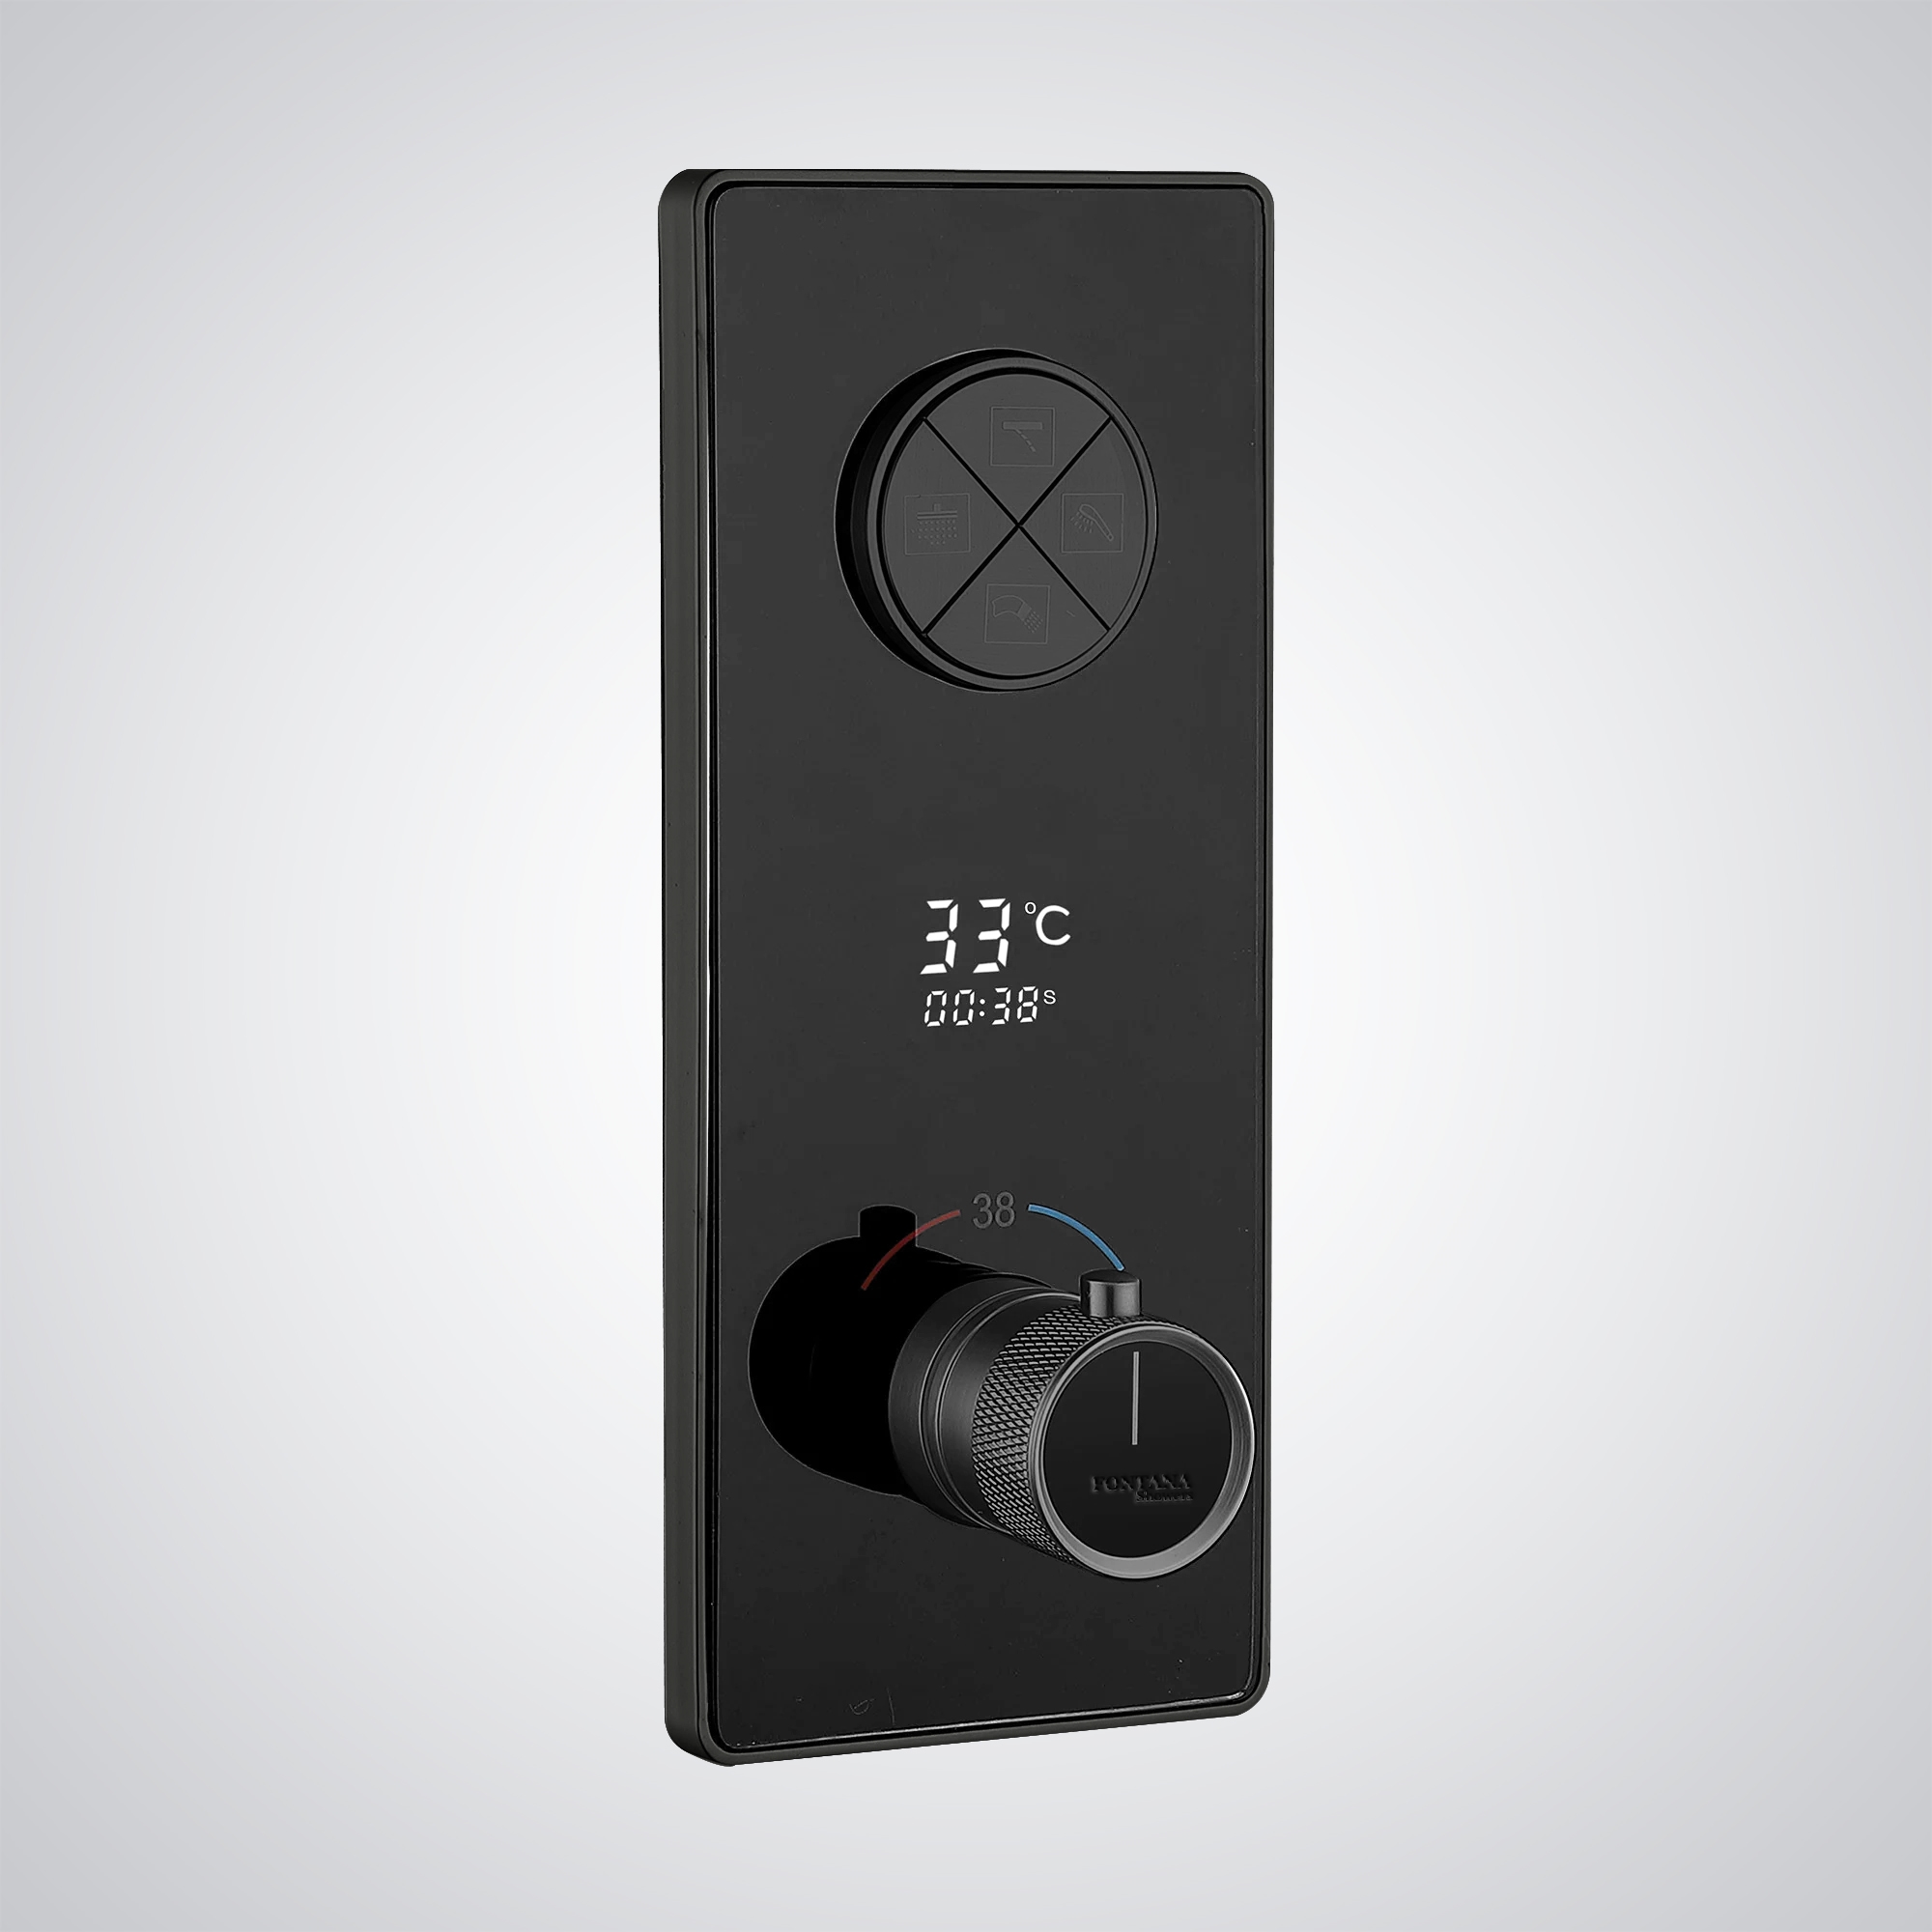 Fontana Matte Black In Thermostatic Mixer With Temperature Display